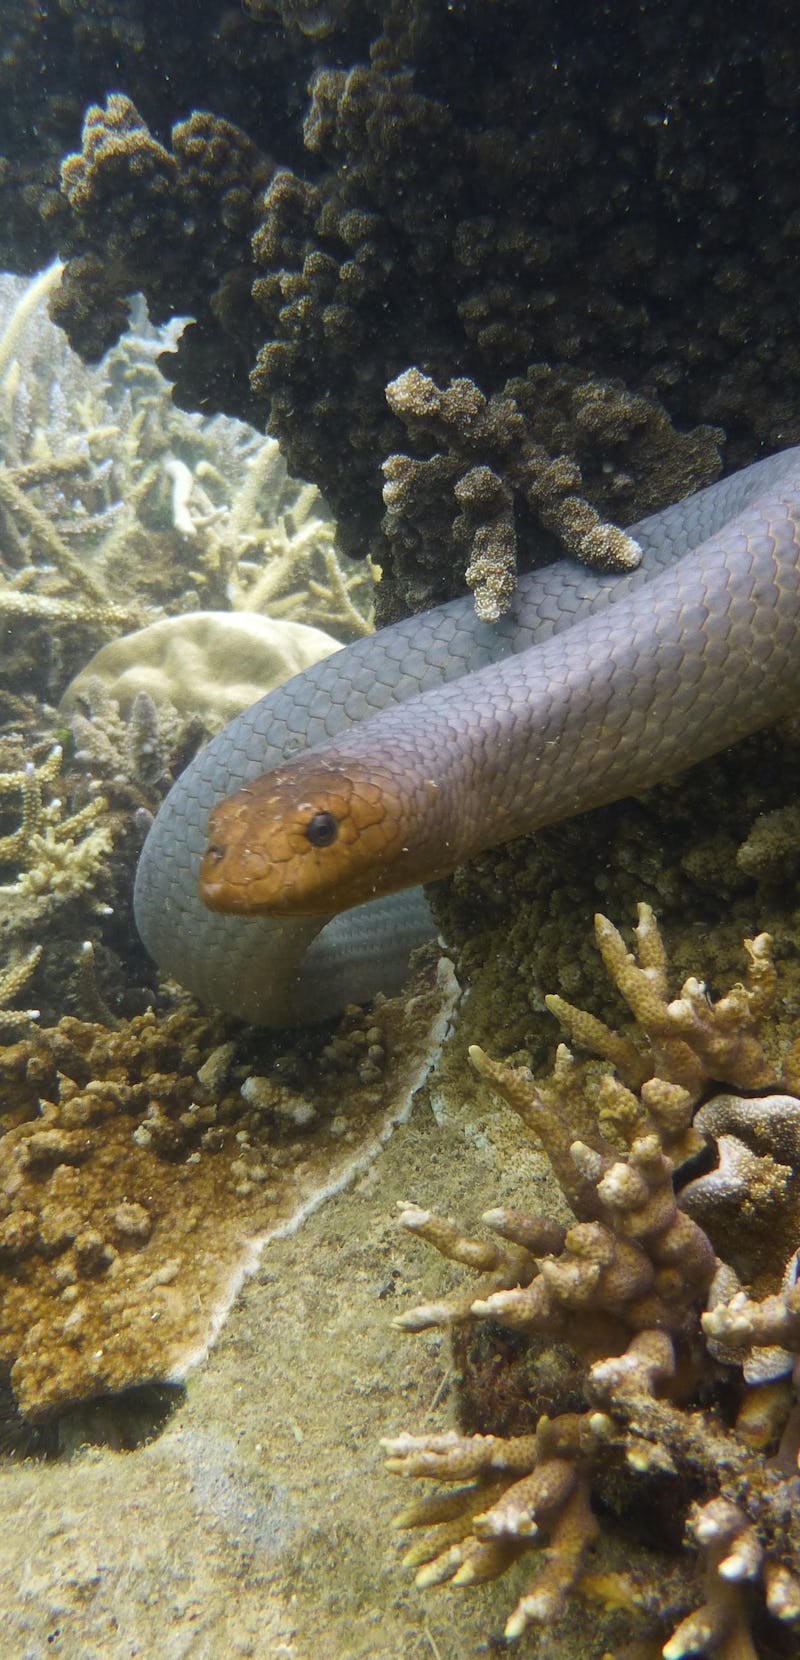 A curious Olive sea snake approaching a diver. 